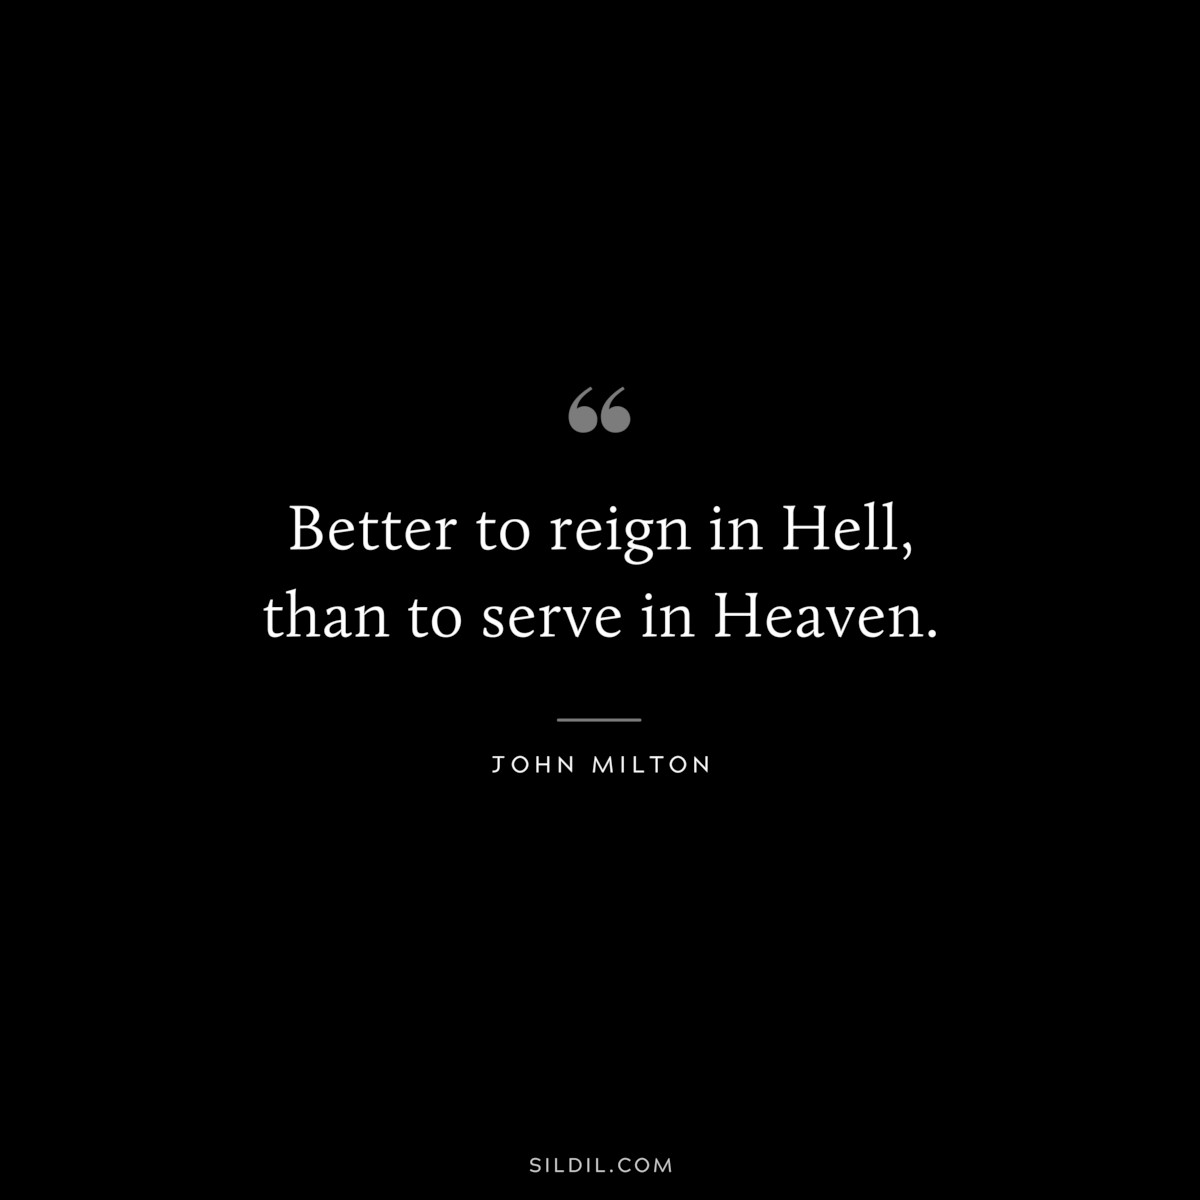 Better to reign in Hell, than to serve in Heaven. ― John Milton